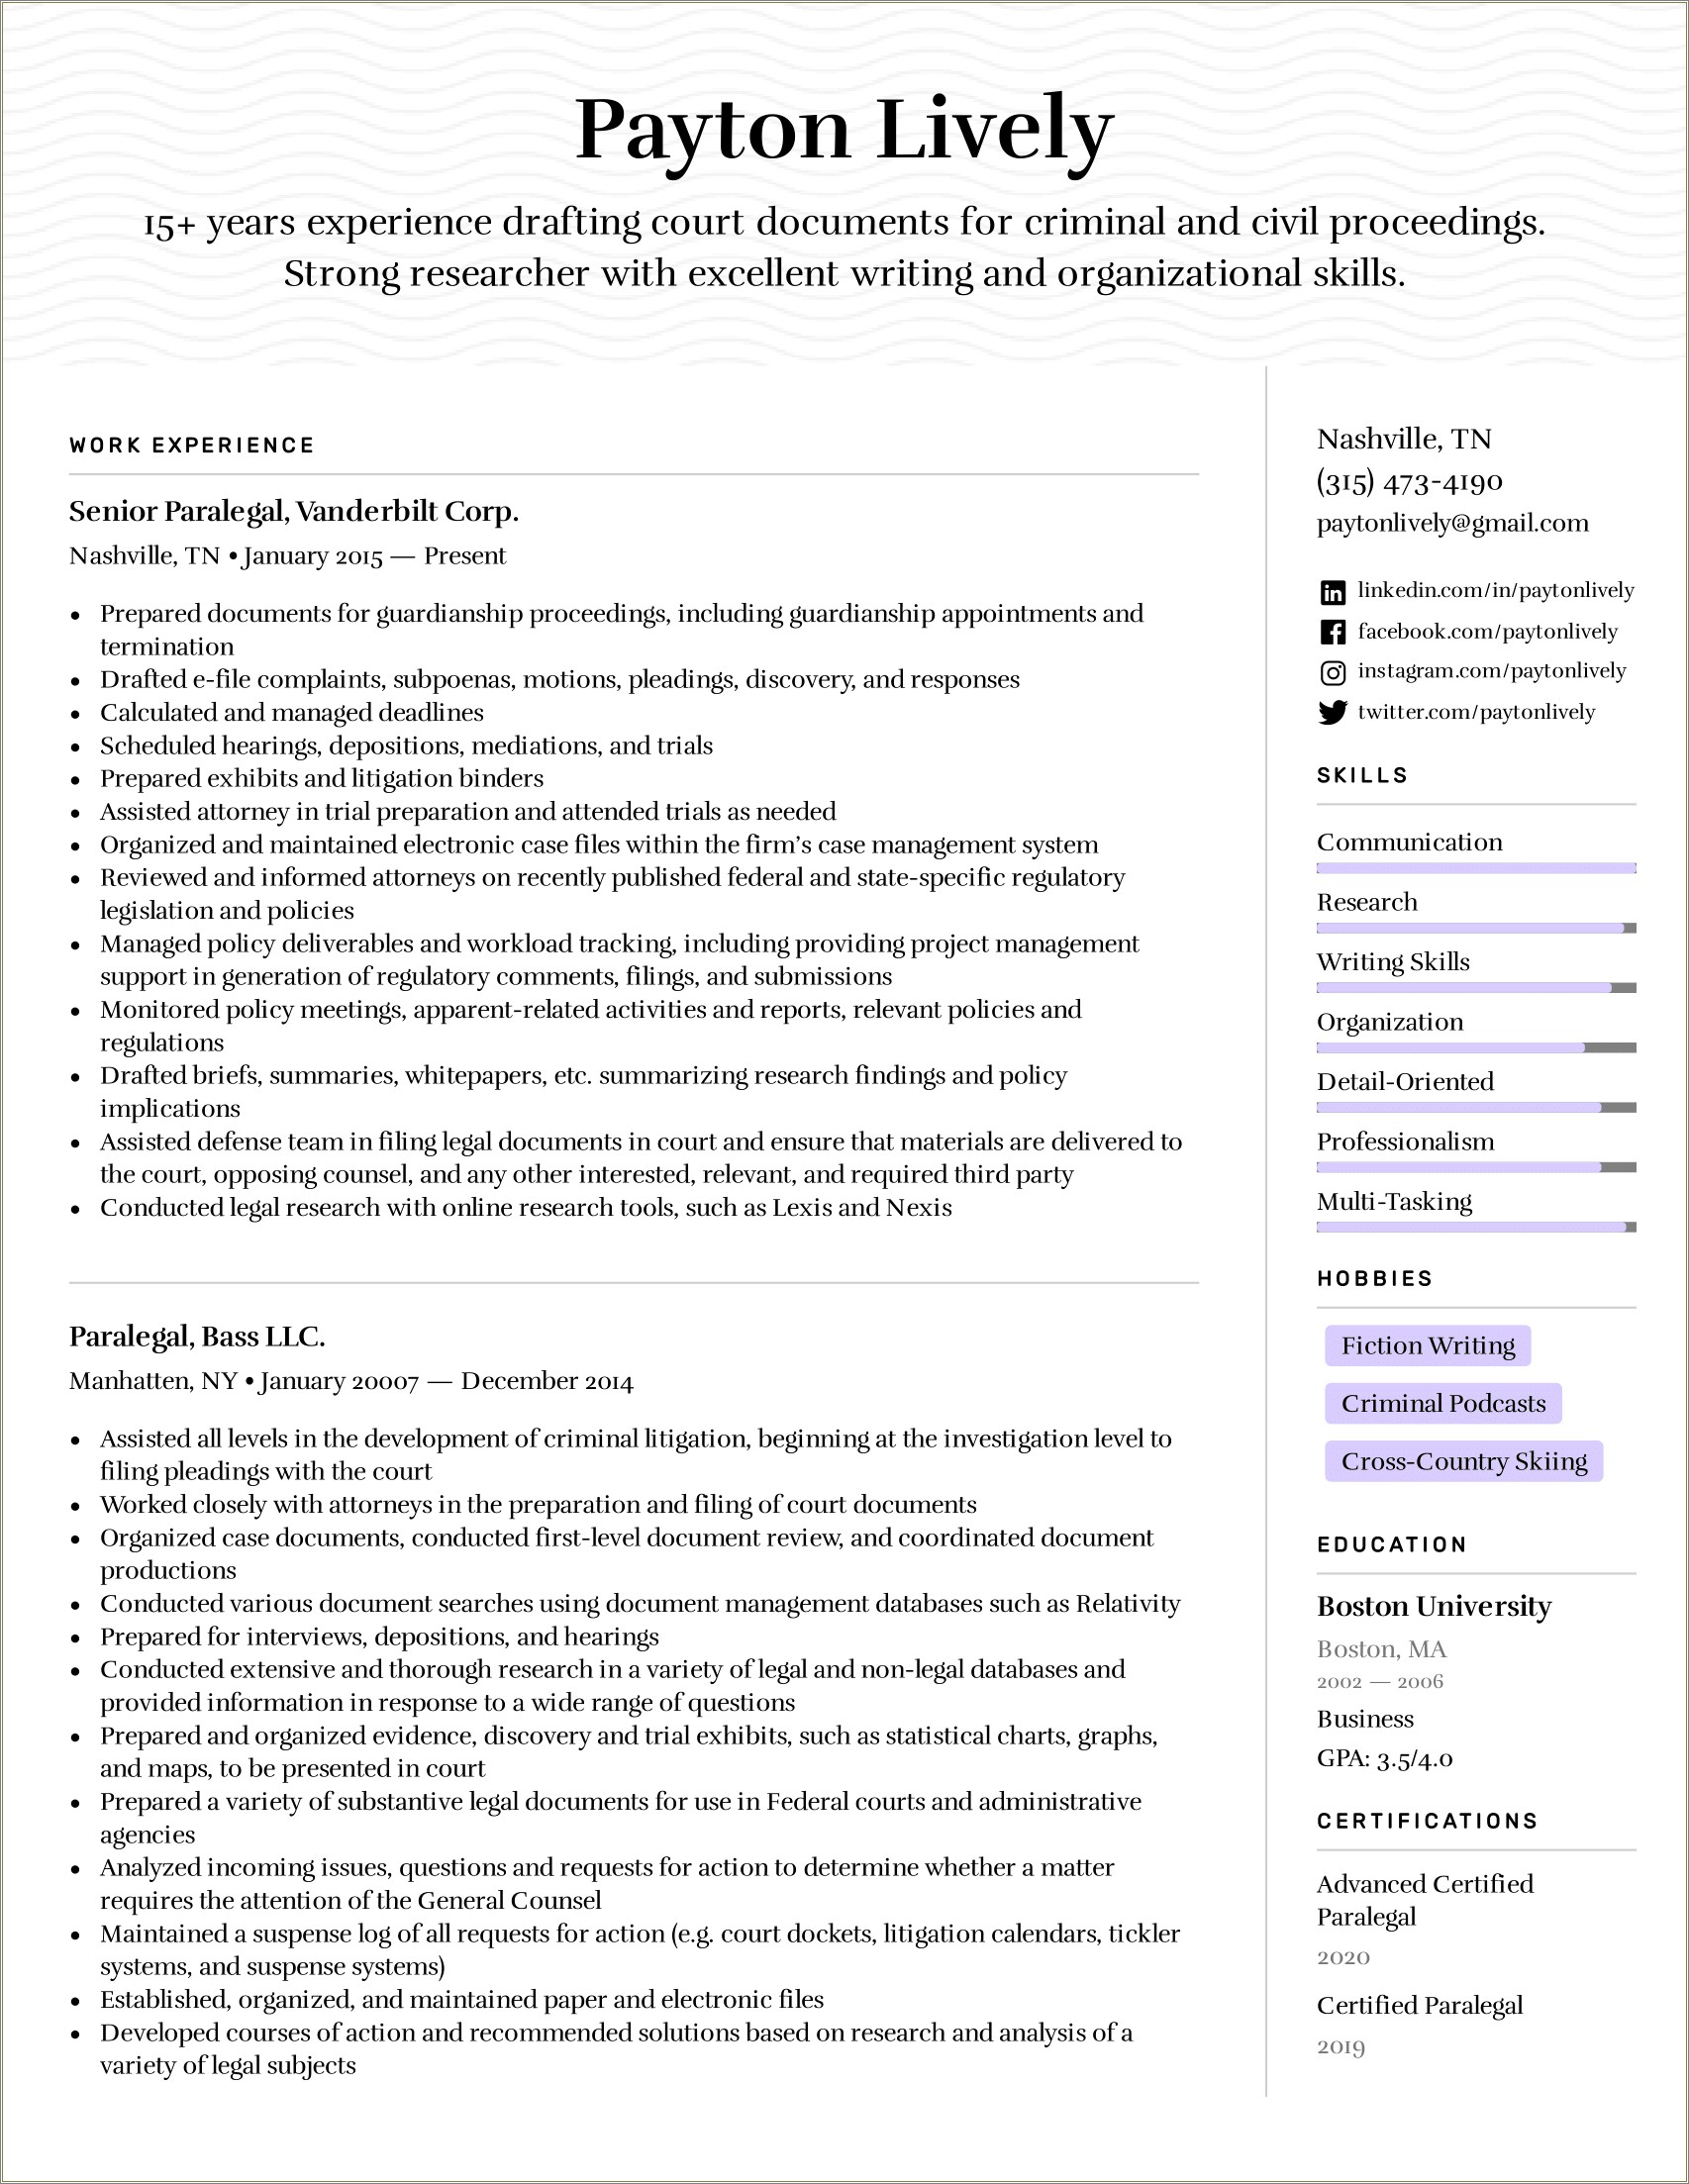 Personal Strengths To Put On An Internship Resume